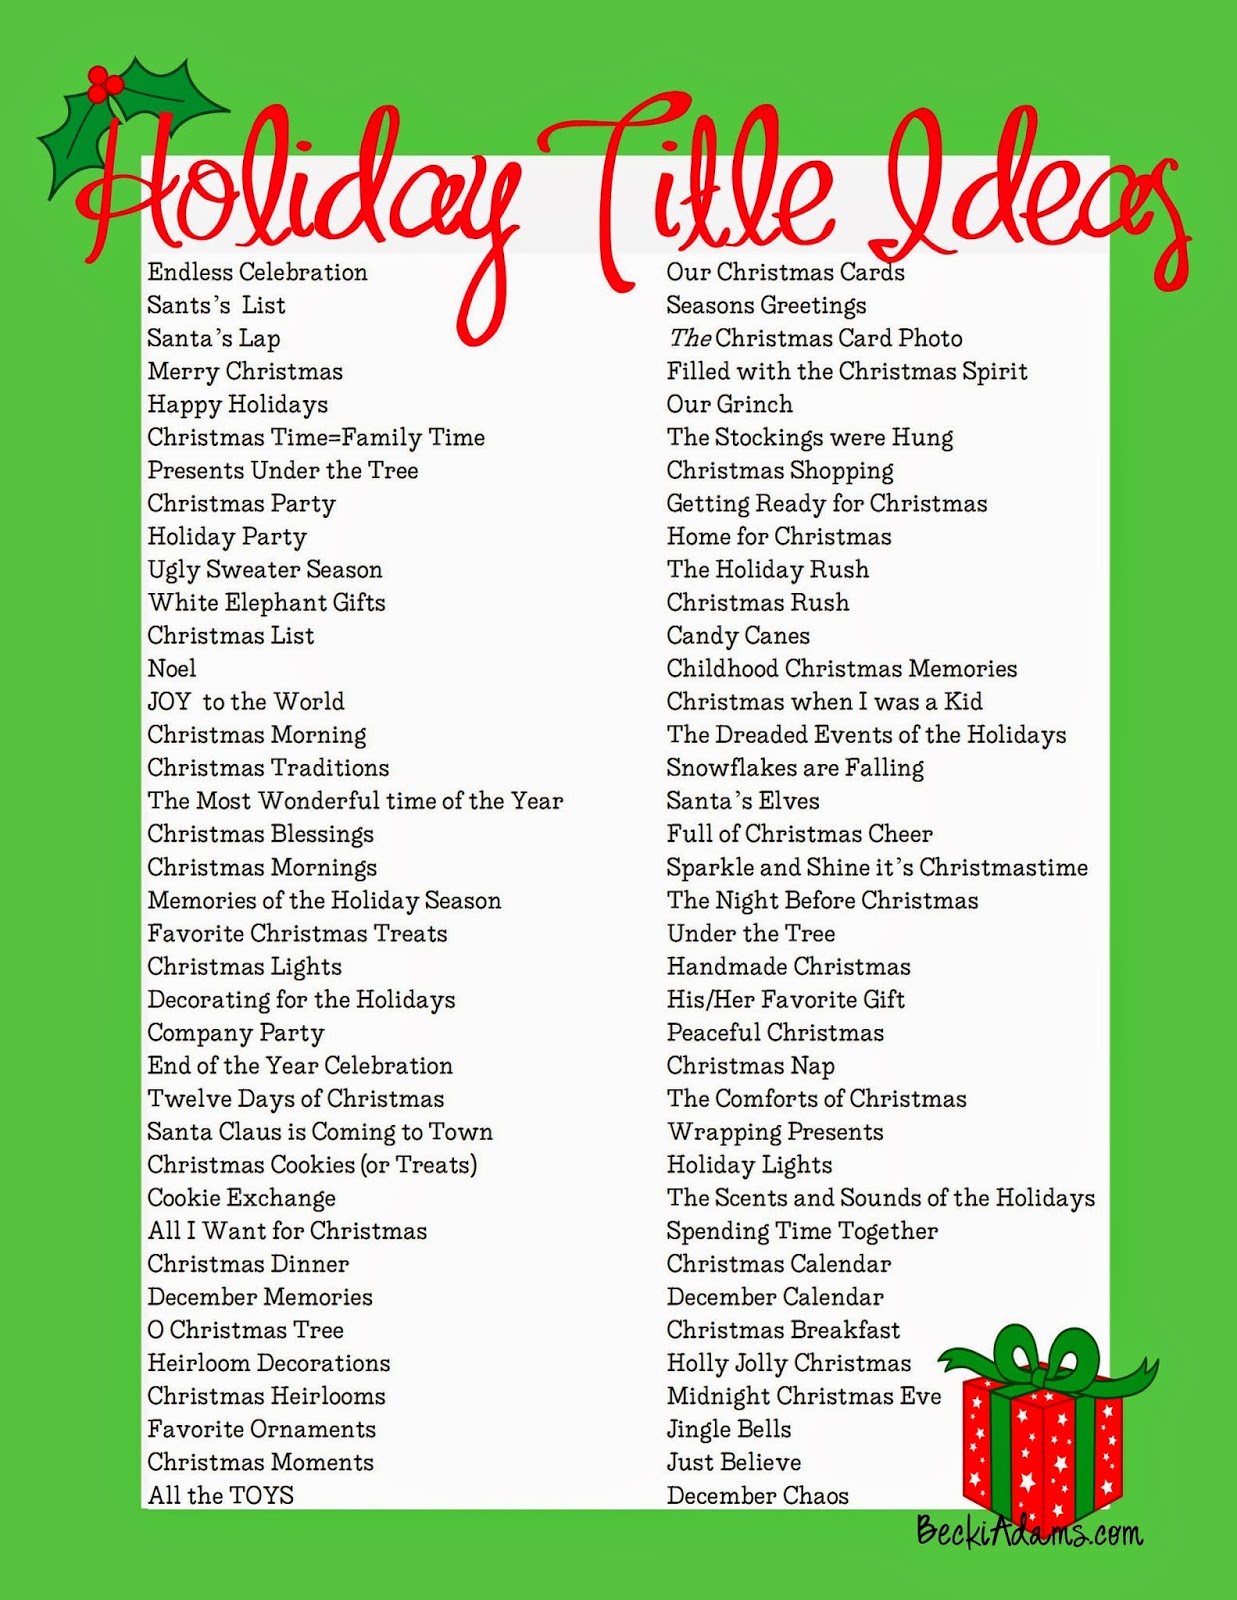 Becki Adams: 76 Holiday Page Title Ideas